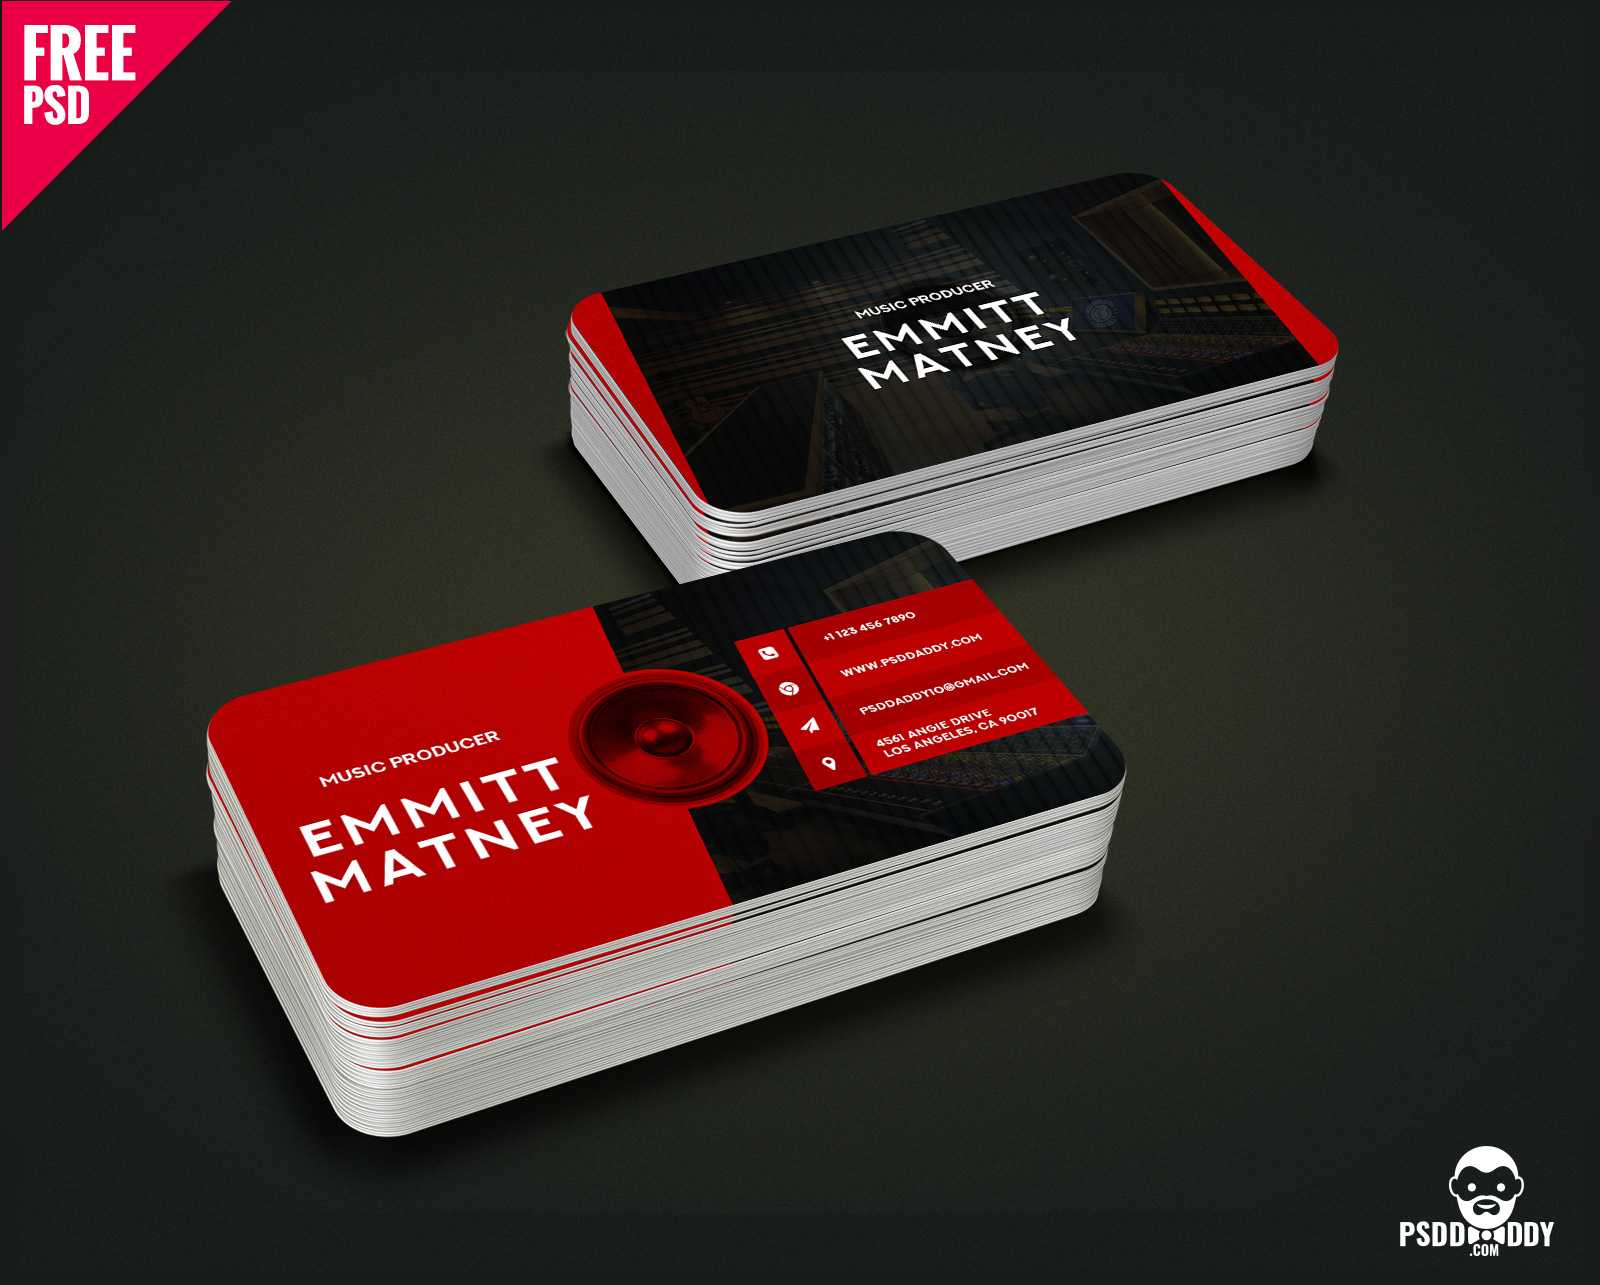 Download] Music Visiting Card Free Psd | Psddaddy In Visiting Card Template Psd Free Download